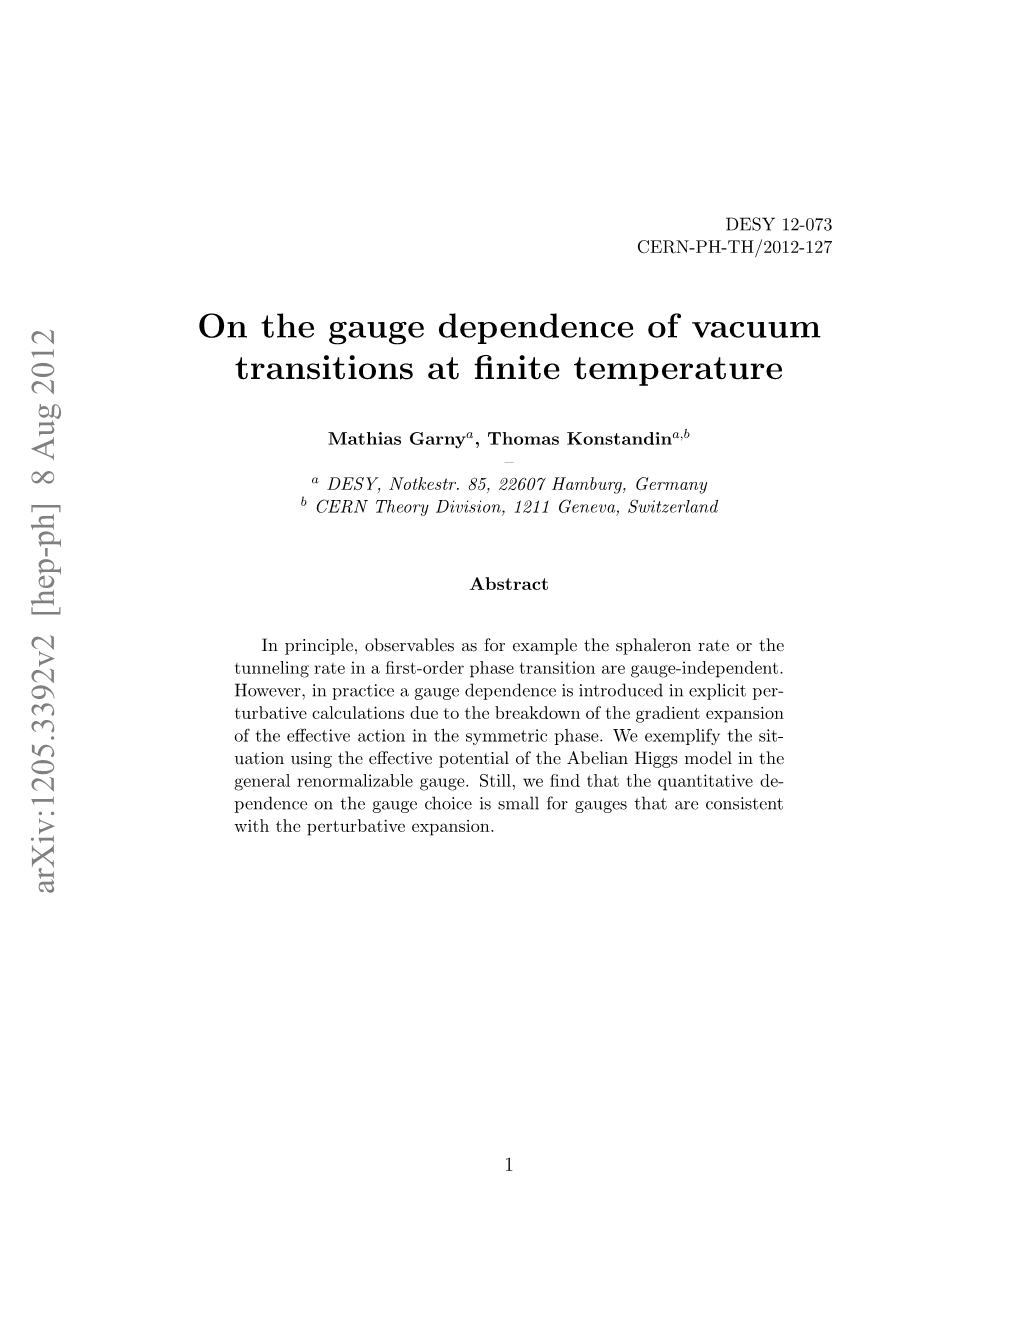 On the Gauge Dependence of Vacuum Transitions at Finite Temperature